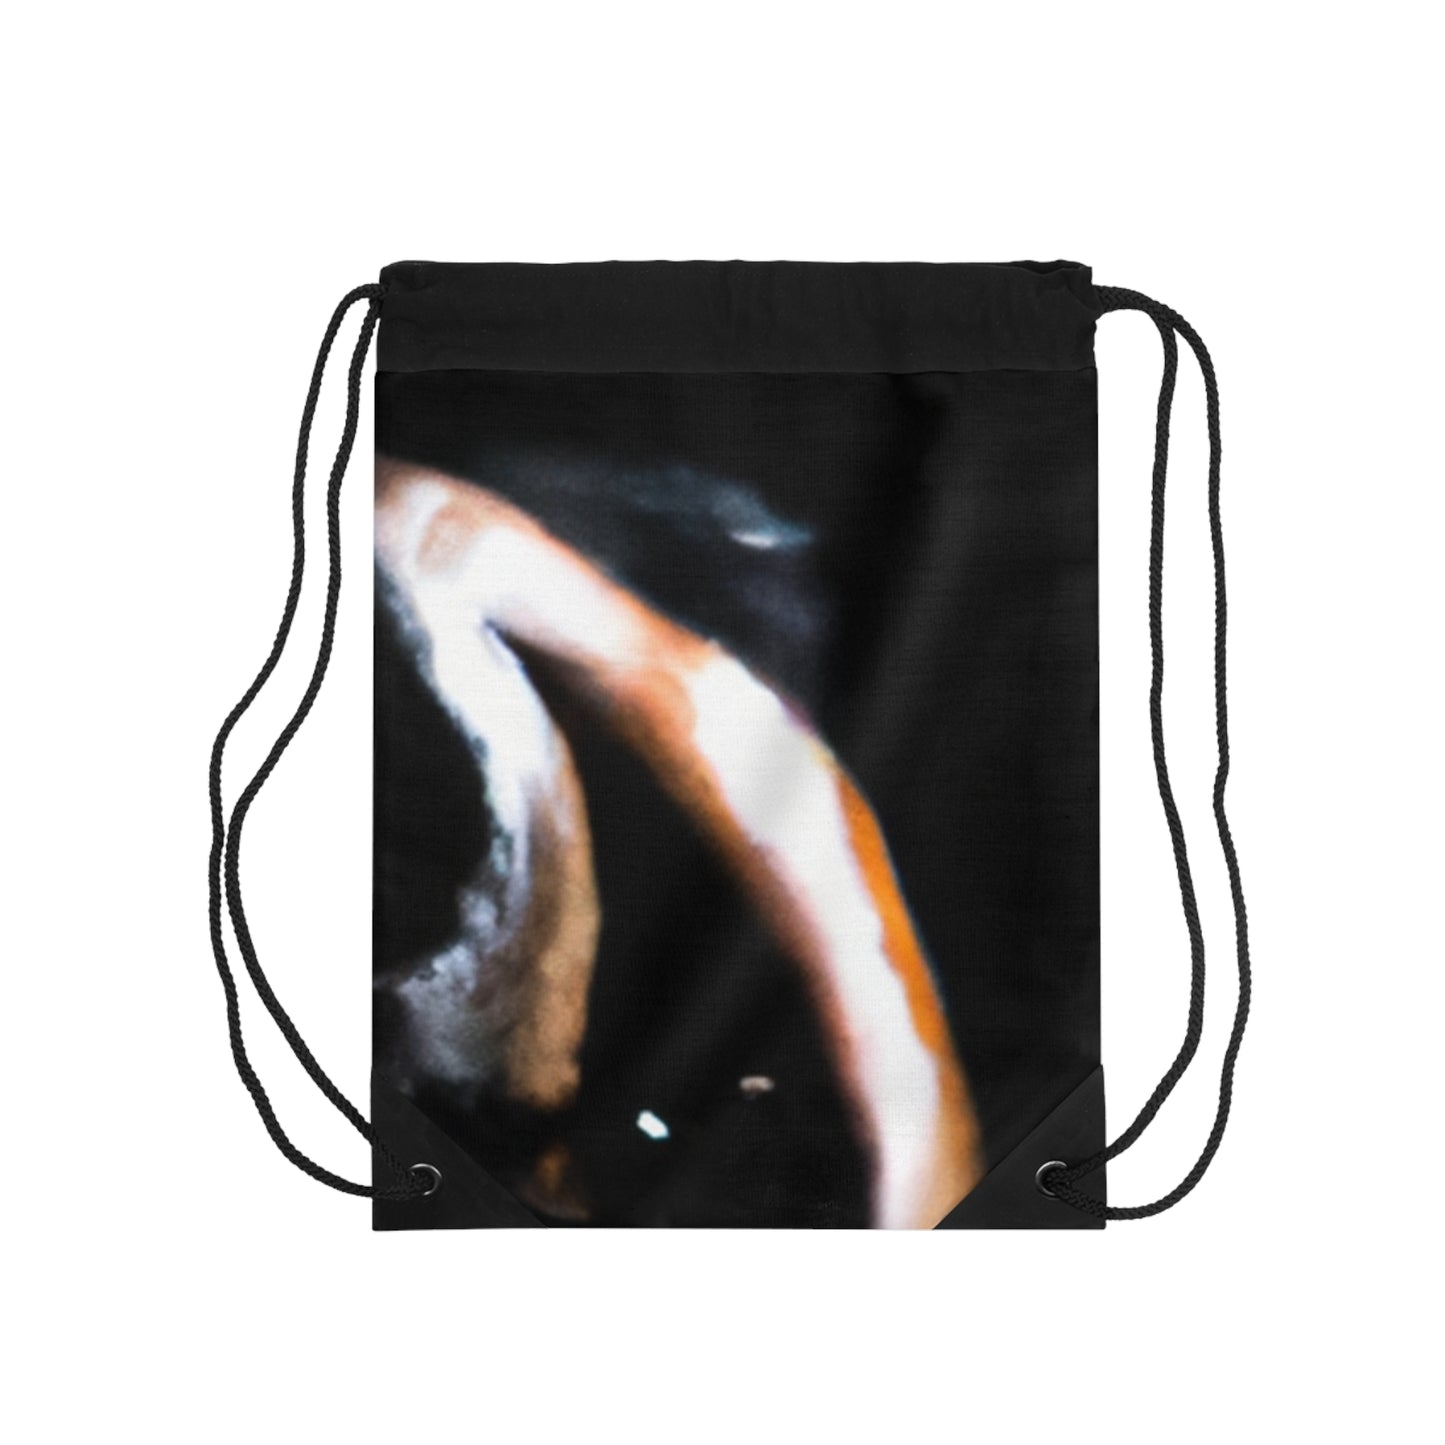 Dynamic Movements in Motion: Capturing the Energy of Sport Through Art - Go Plus Drawstring Bag